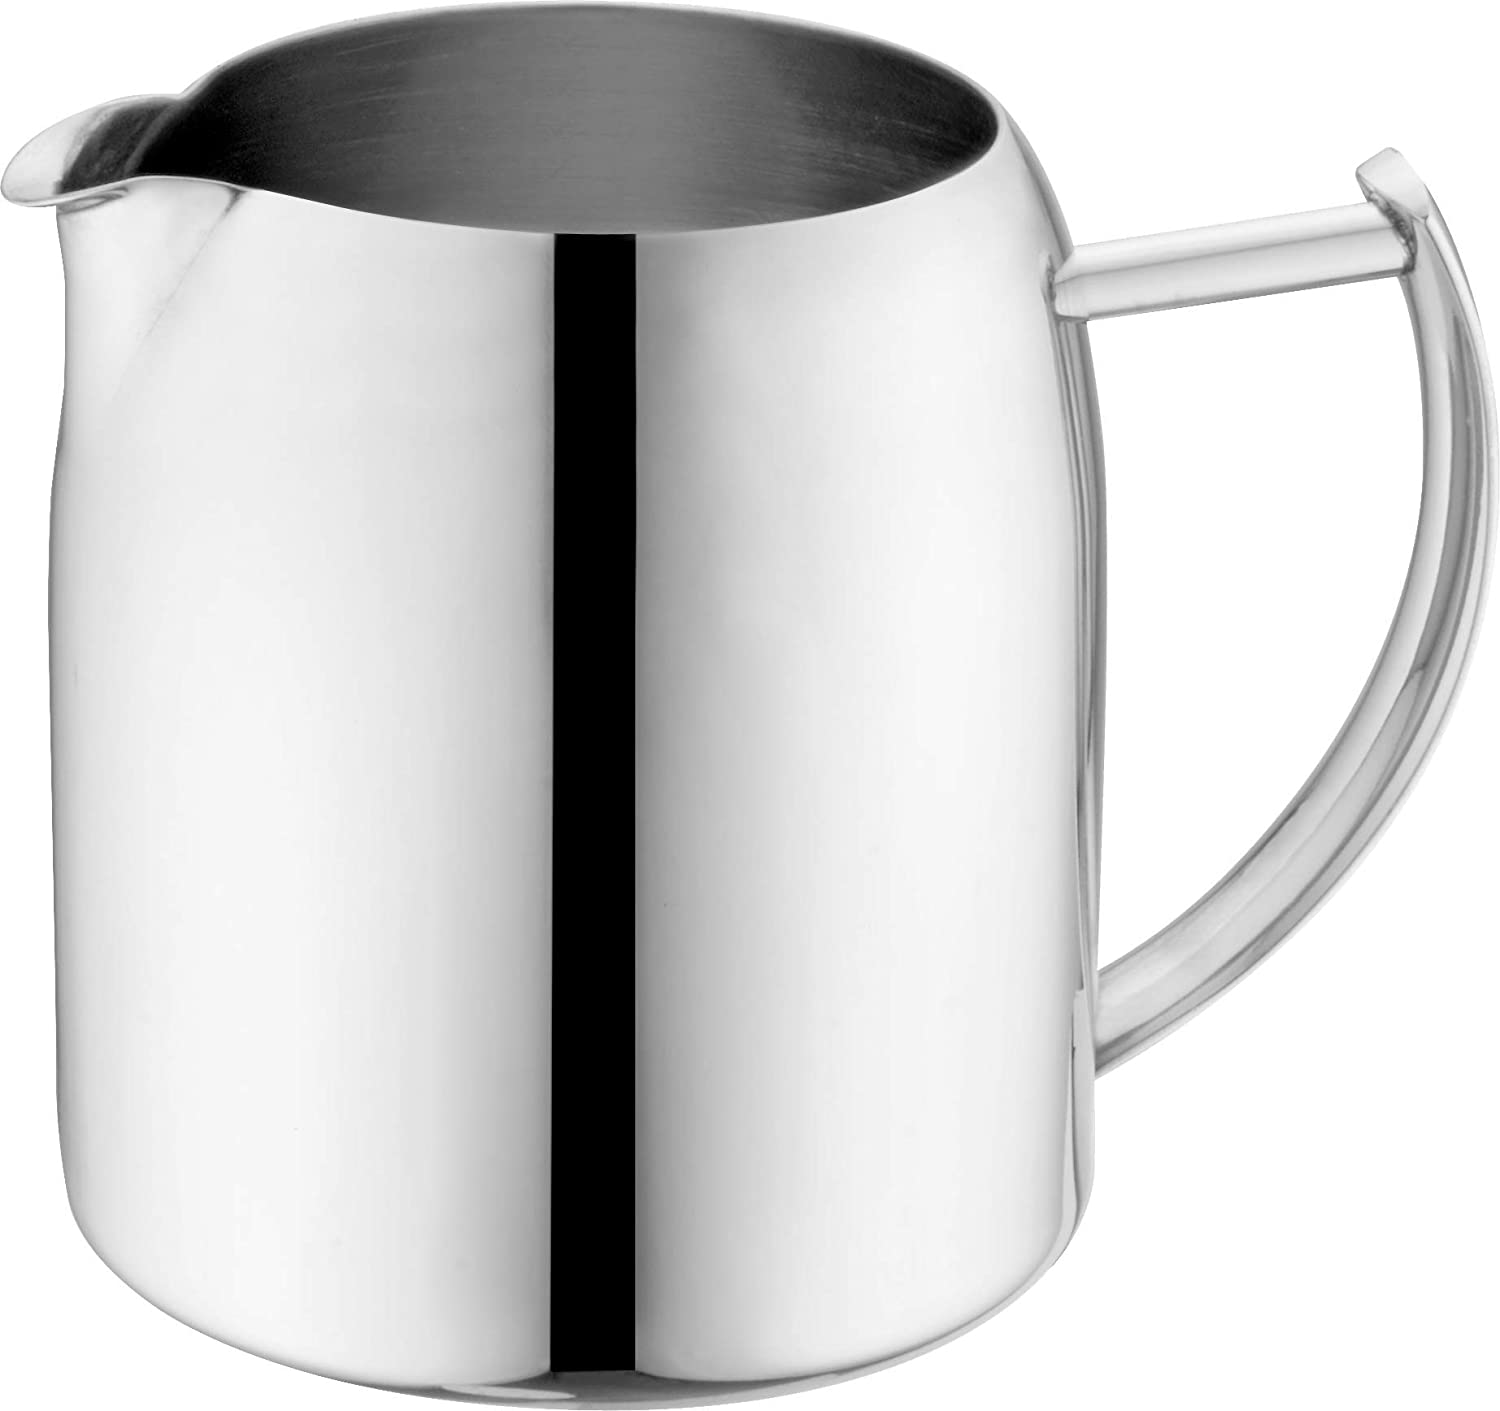 Cafe Ole Café Olé CHM-012 Chatsworth Milk Jug Made of High-Quality Stainless Steel 18/10 - High Gloss Polish, 12 oz, 0.34 L, Storage, Milk Accessories, Stainless Steel